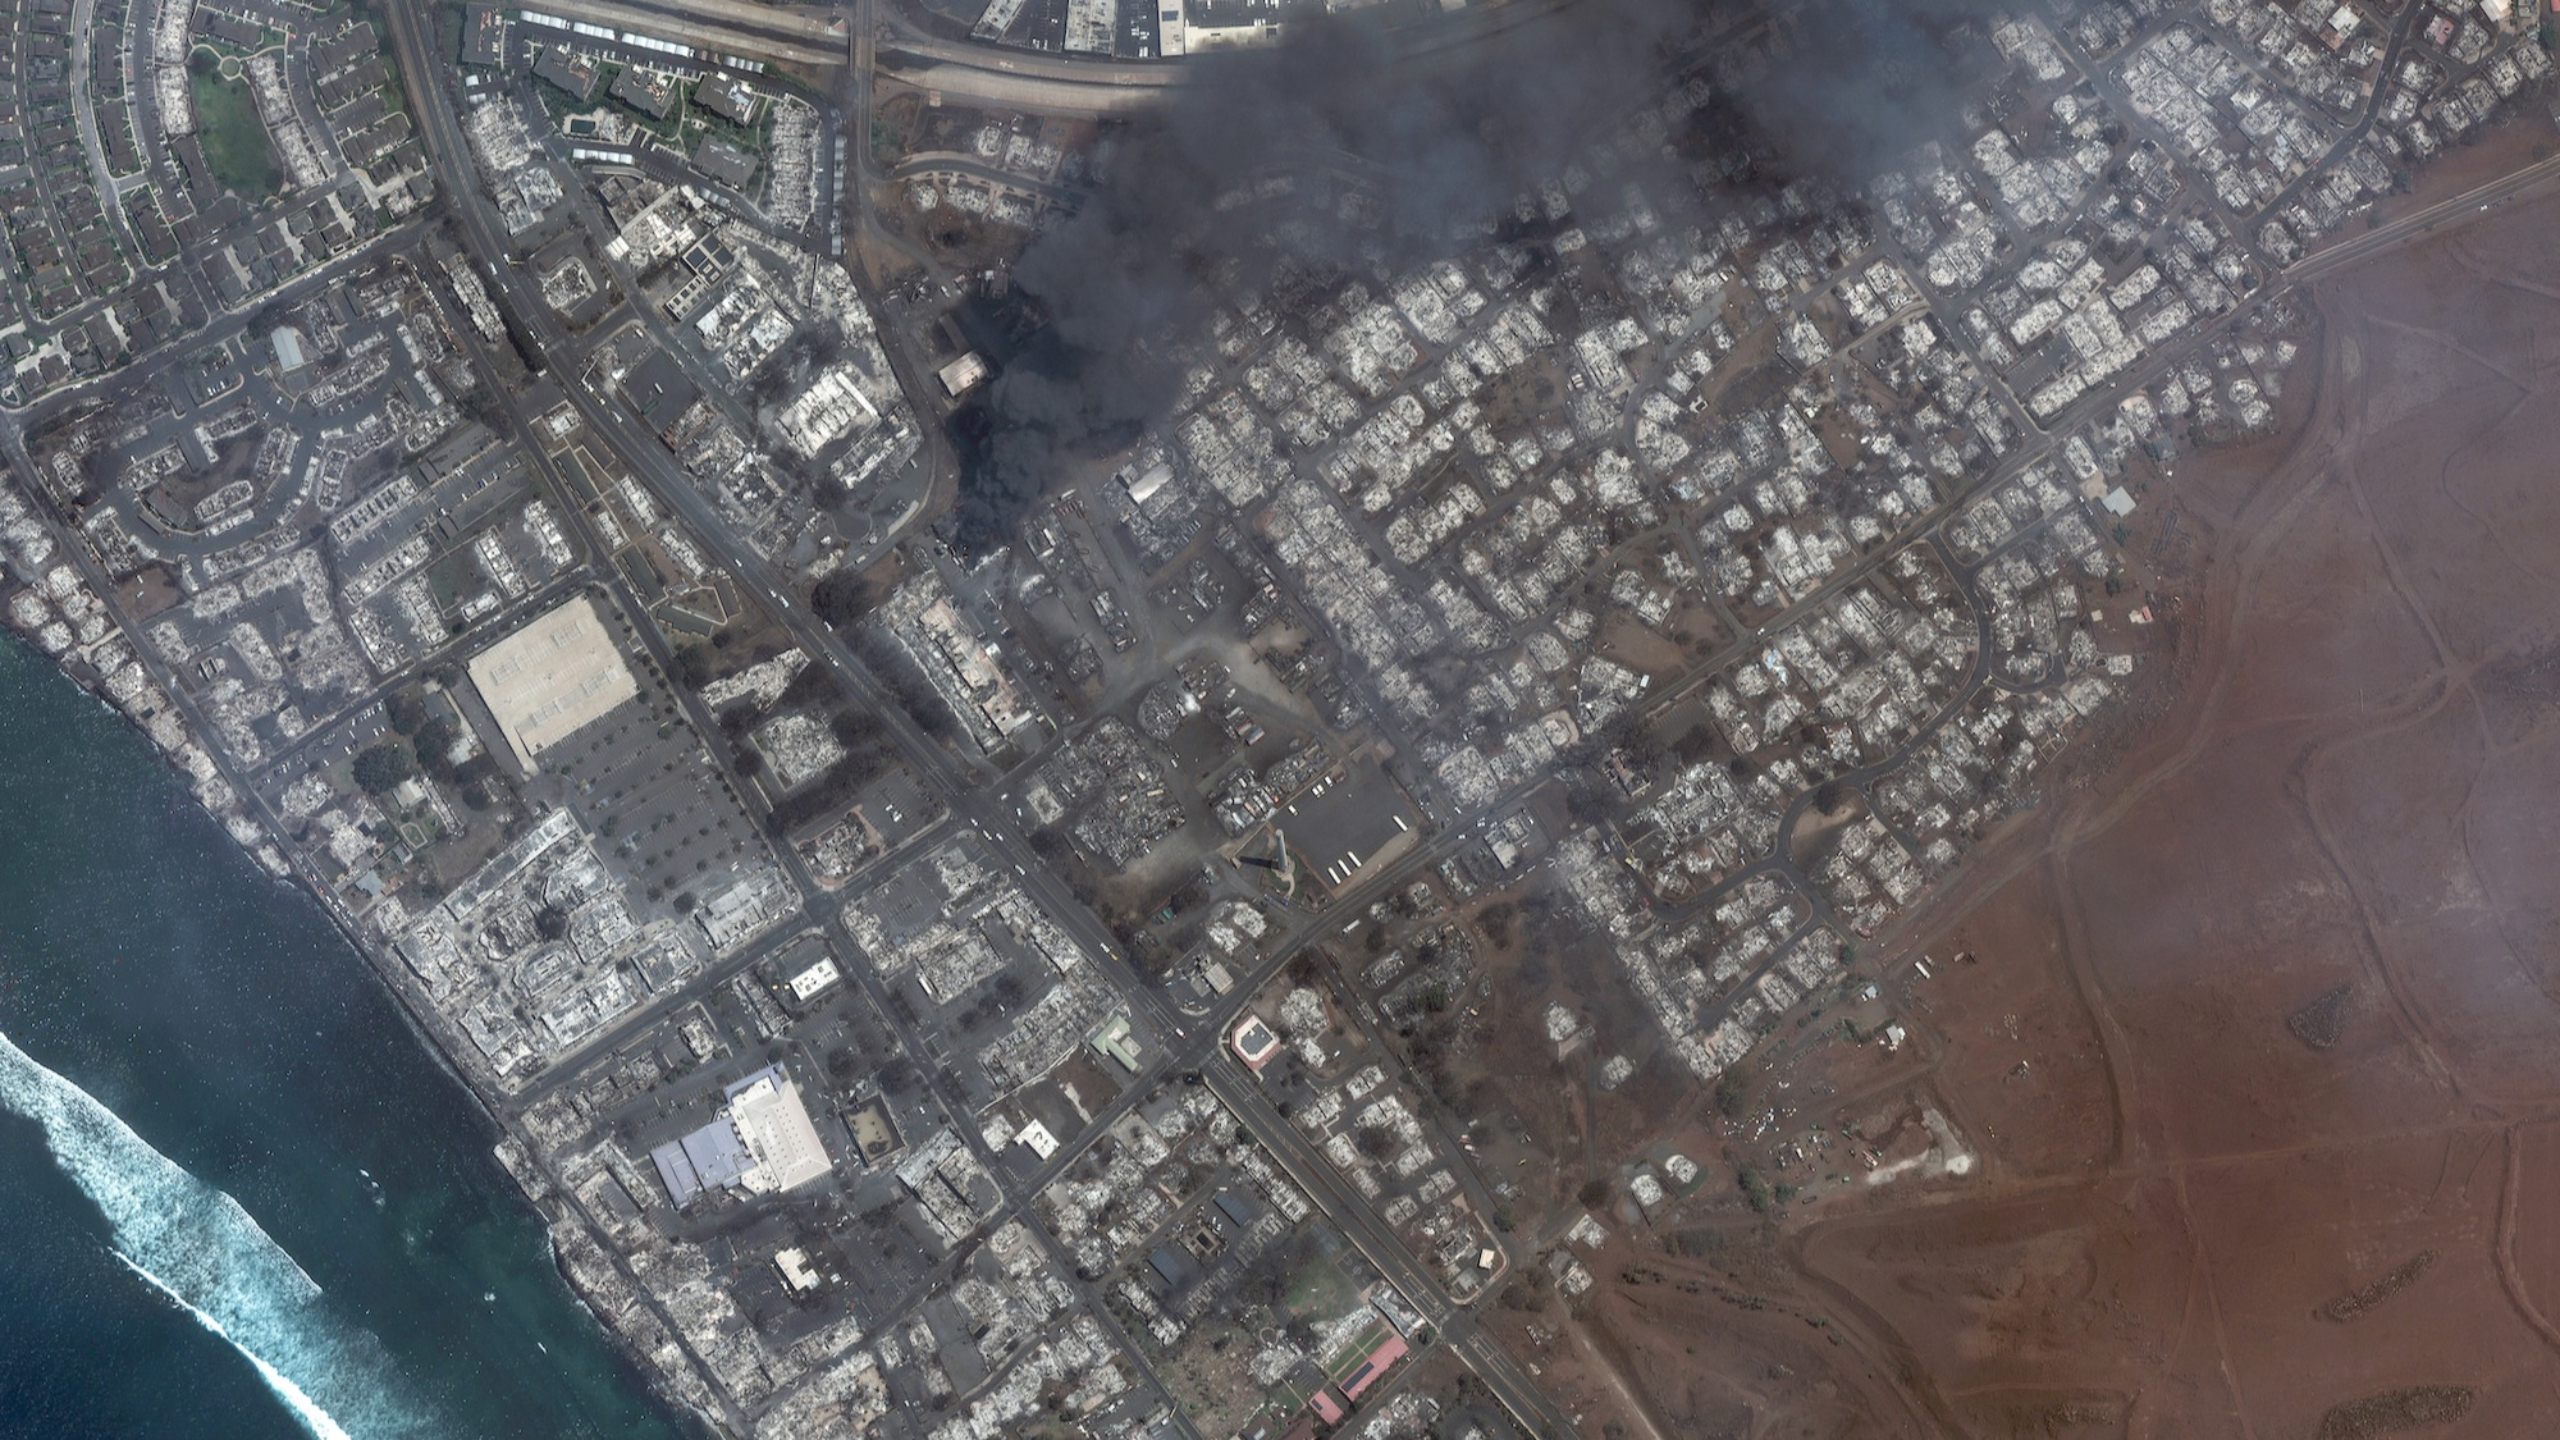 Maxar satellite imagery on August 9, 2023 showing total destruction of the Lahaina square and outlets after the Lahaina Wildfire, with one building still actively burning.